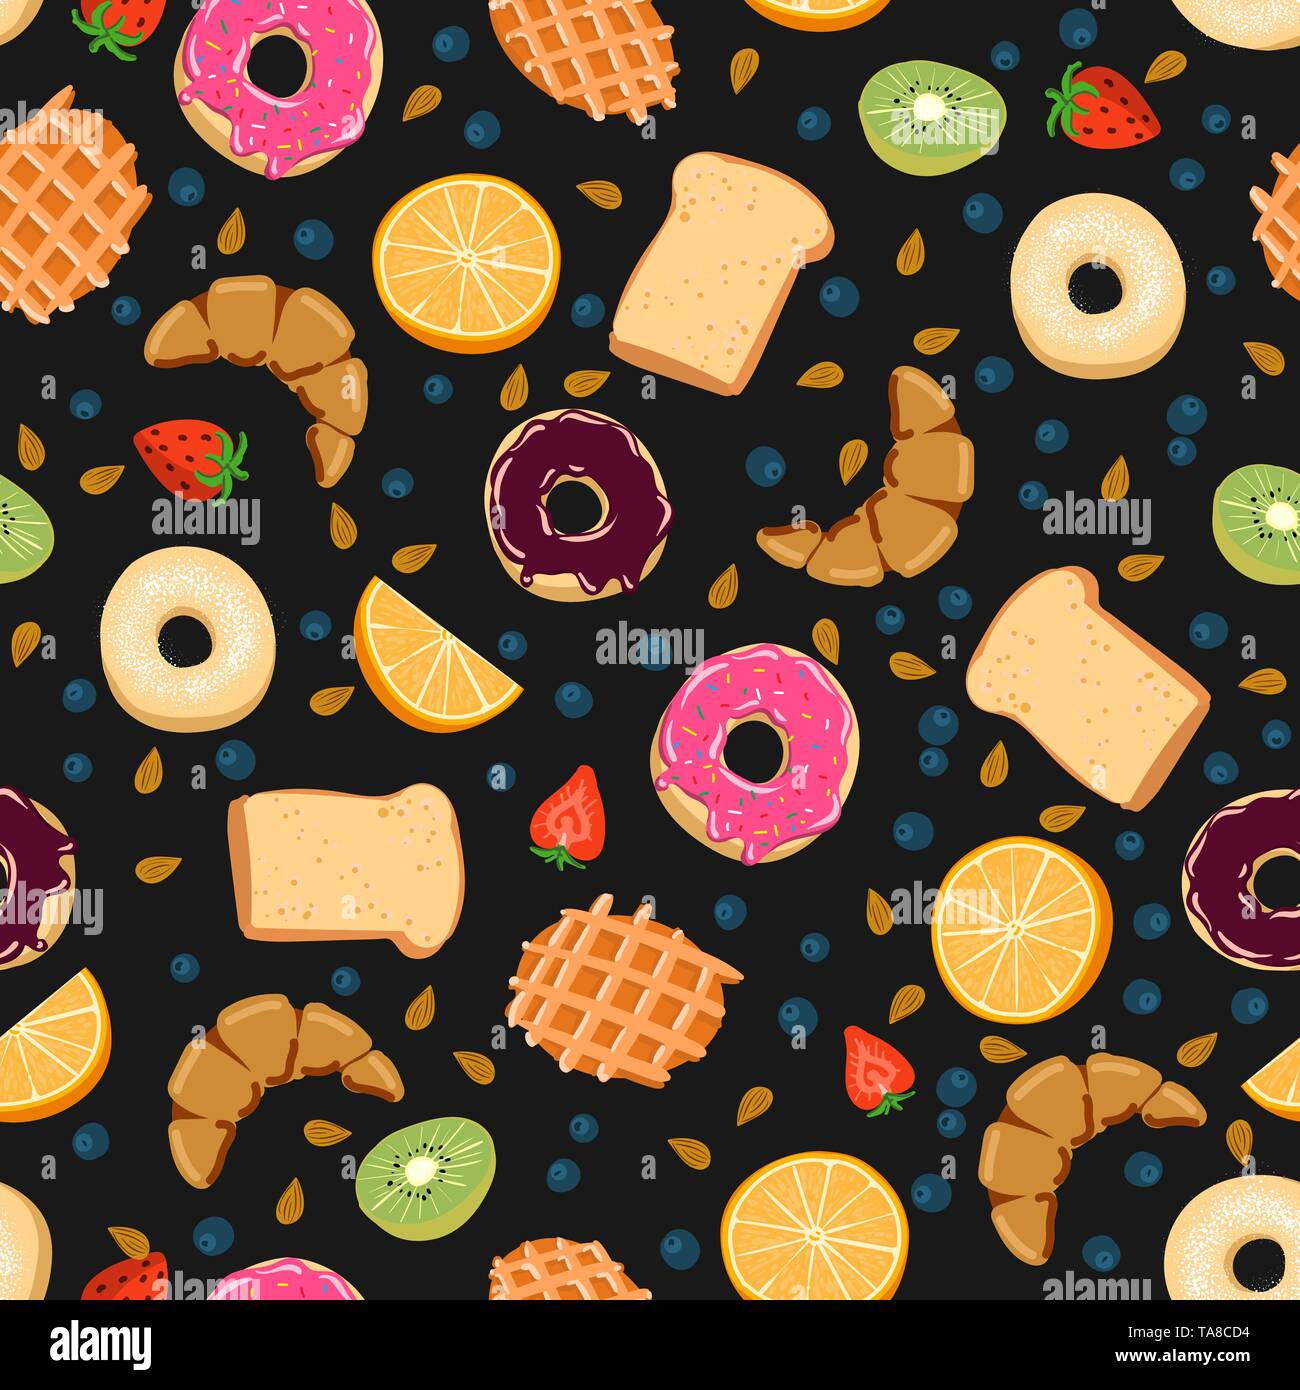 Seamless vector pattern with kawaii breakfast things on black background, perfect for wrapping paper, backgrounds, etc. Stock Vector